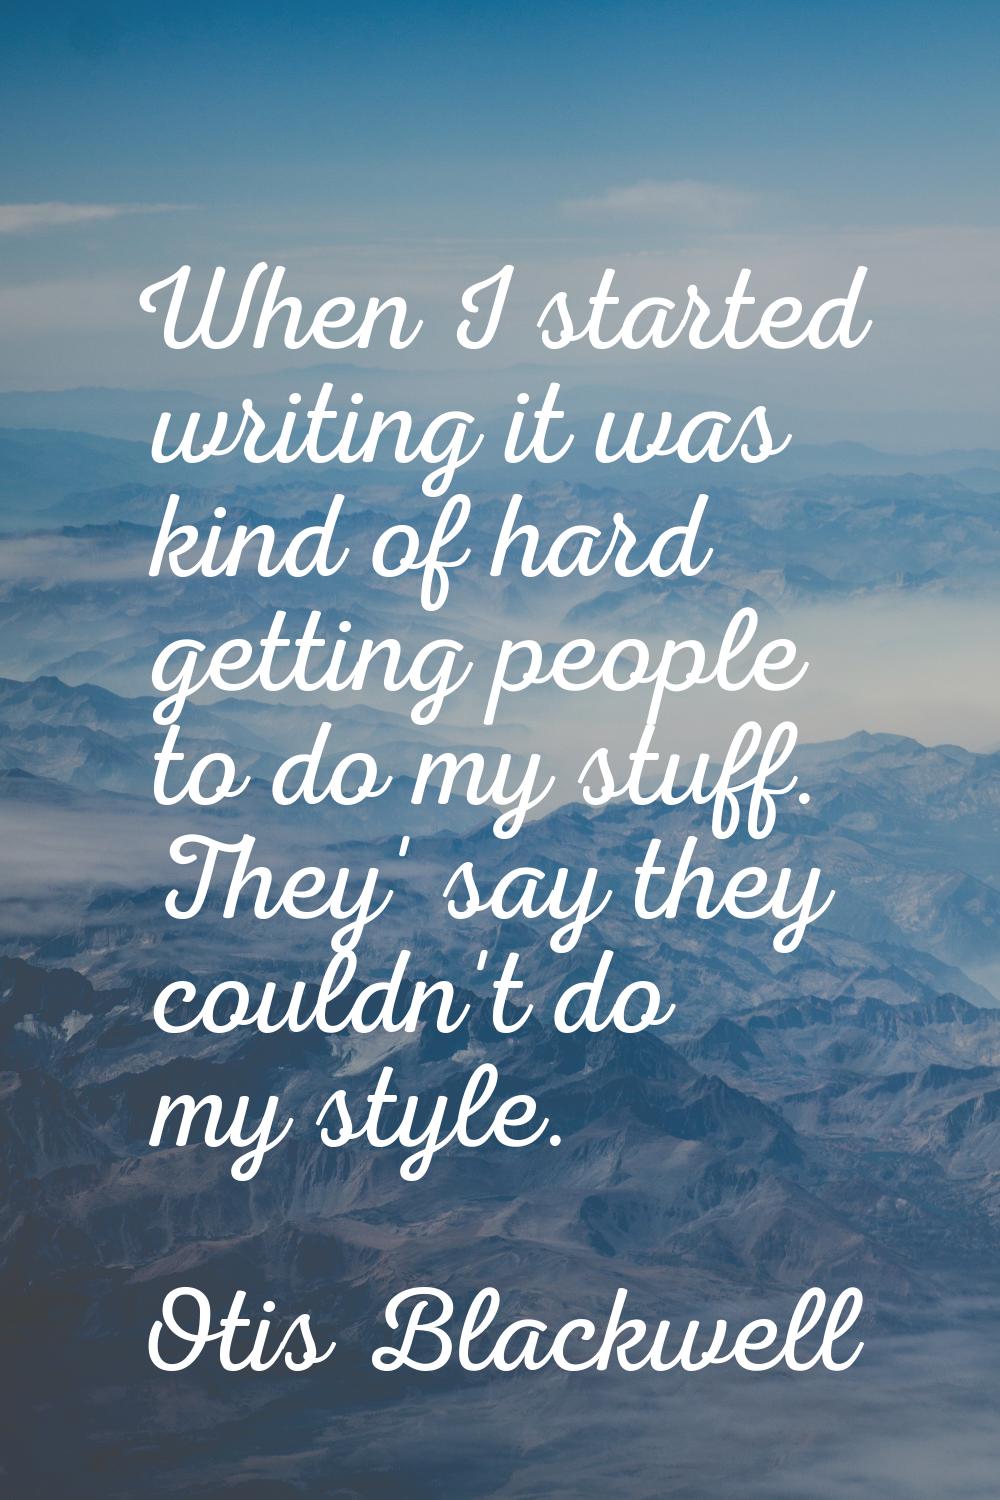 When I started writing it was kind of hard getting people to do my stuff. They' say they couldn't d